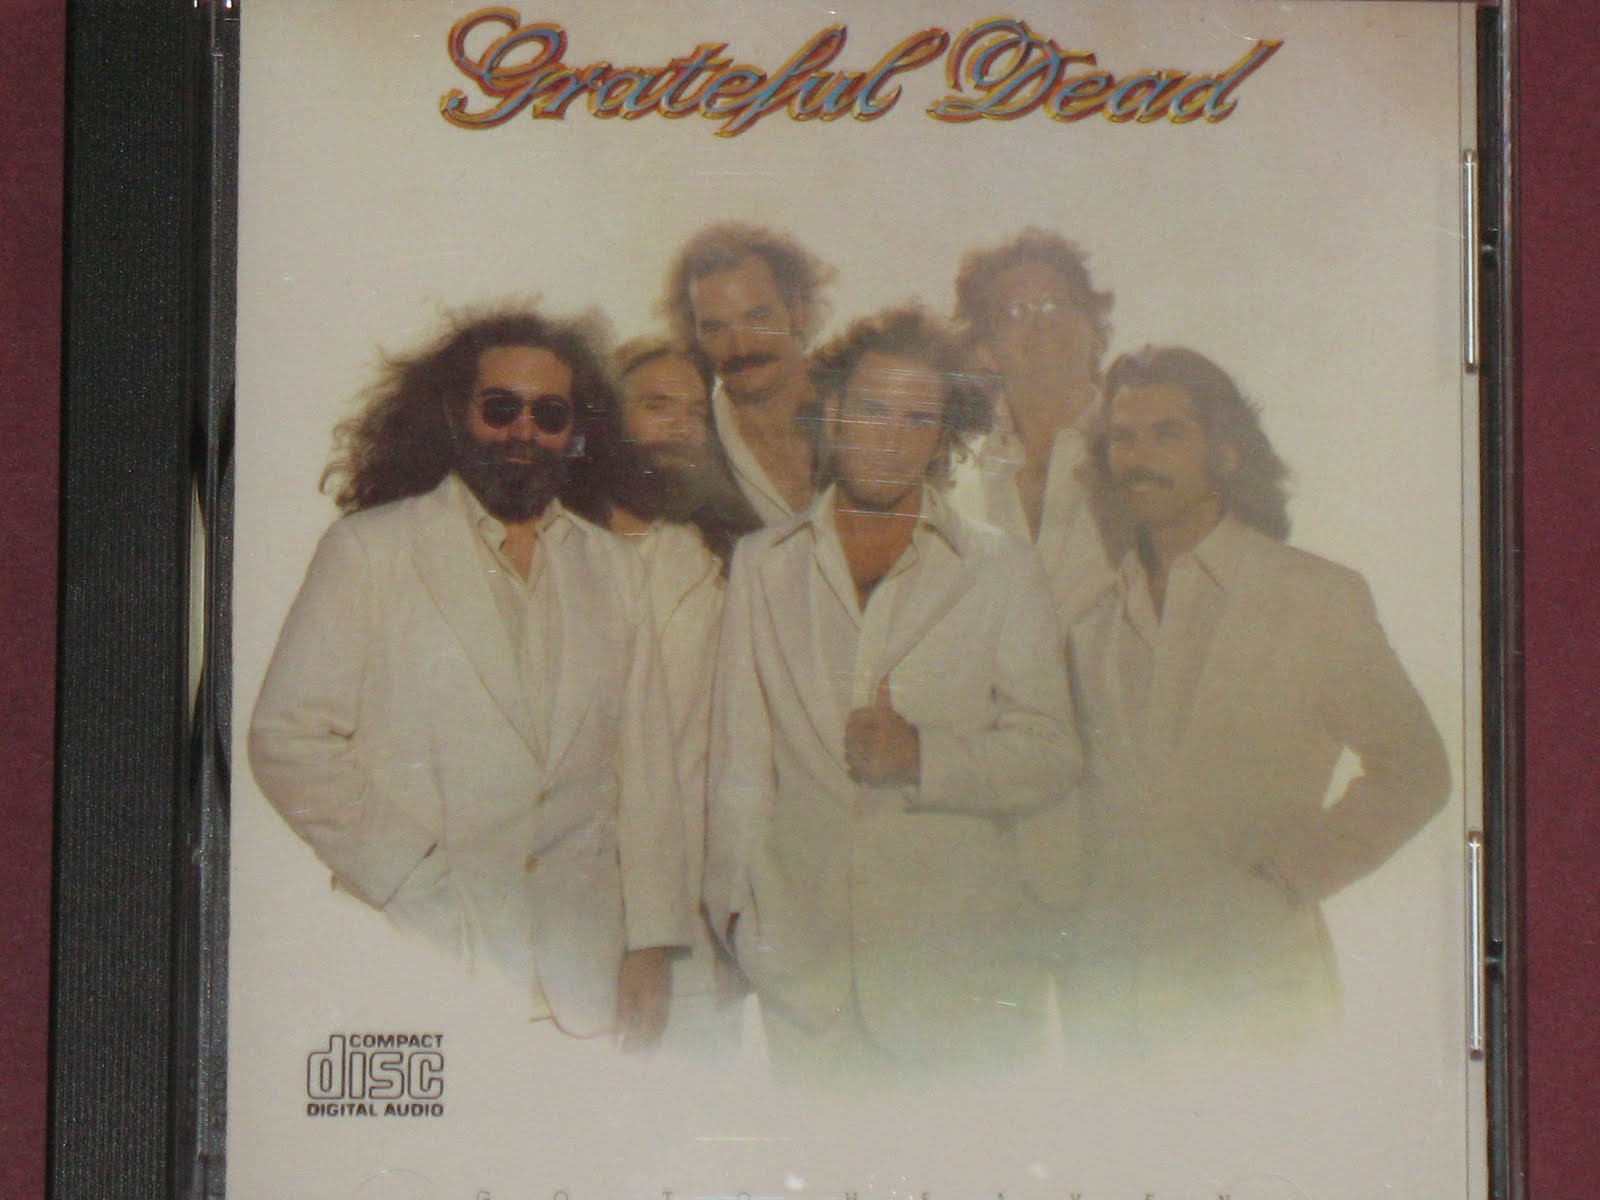 Michael Doherty S Music Log Grateful Dead Go To Heaven 1980 Cd Review